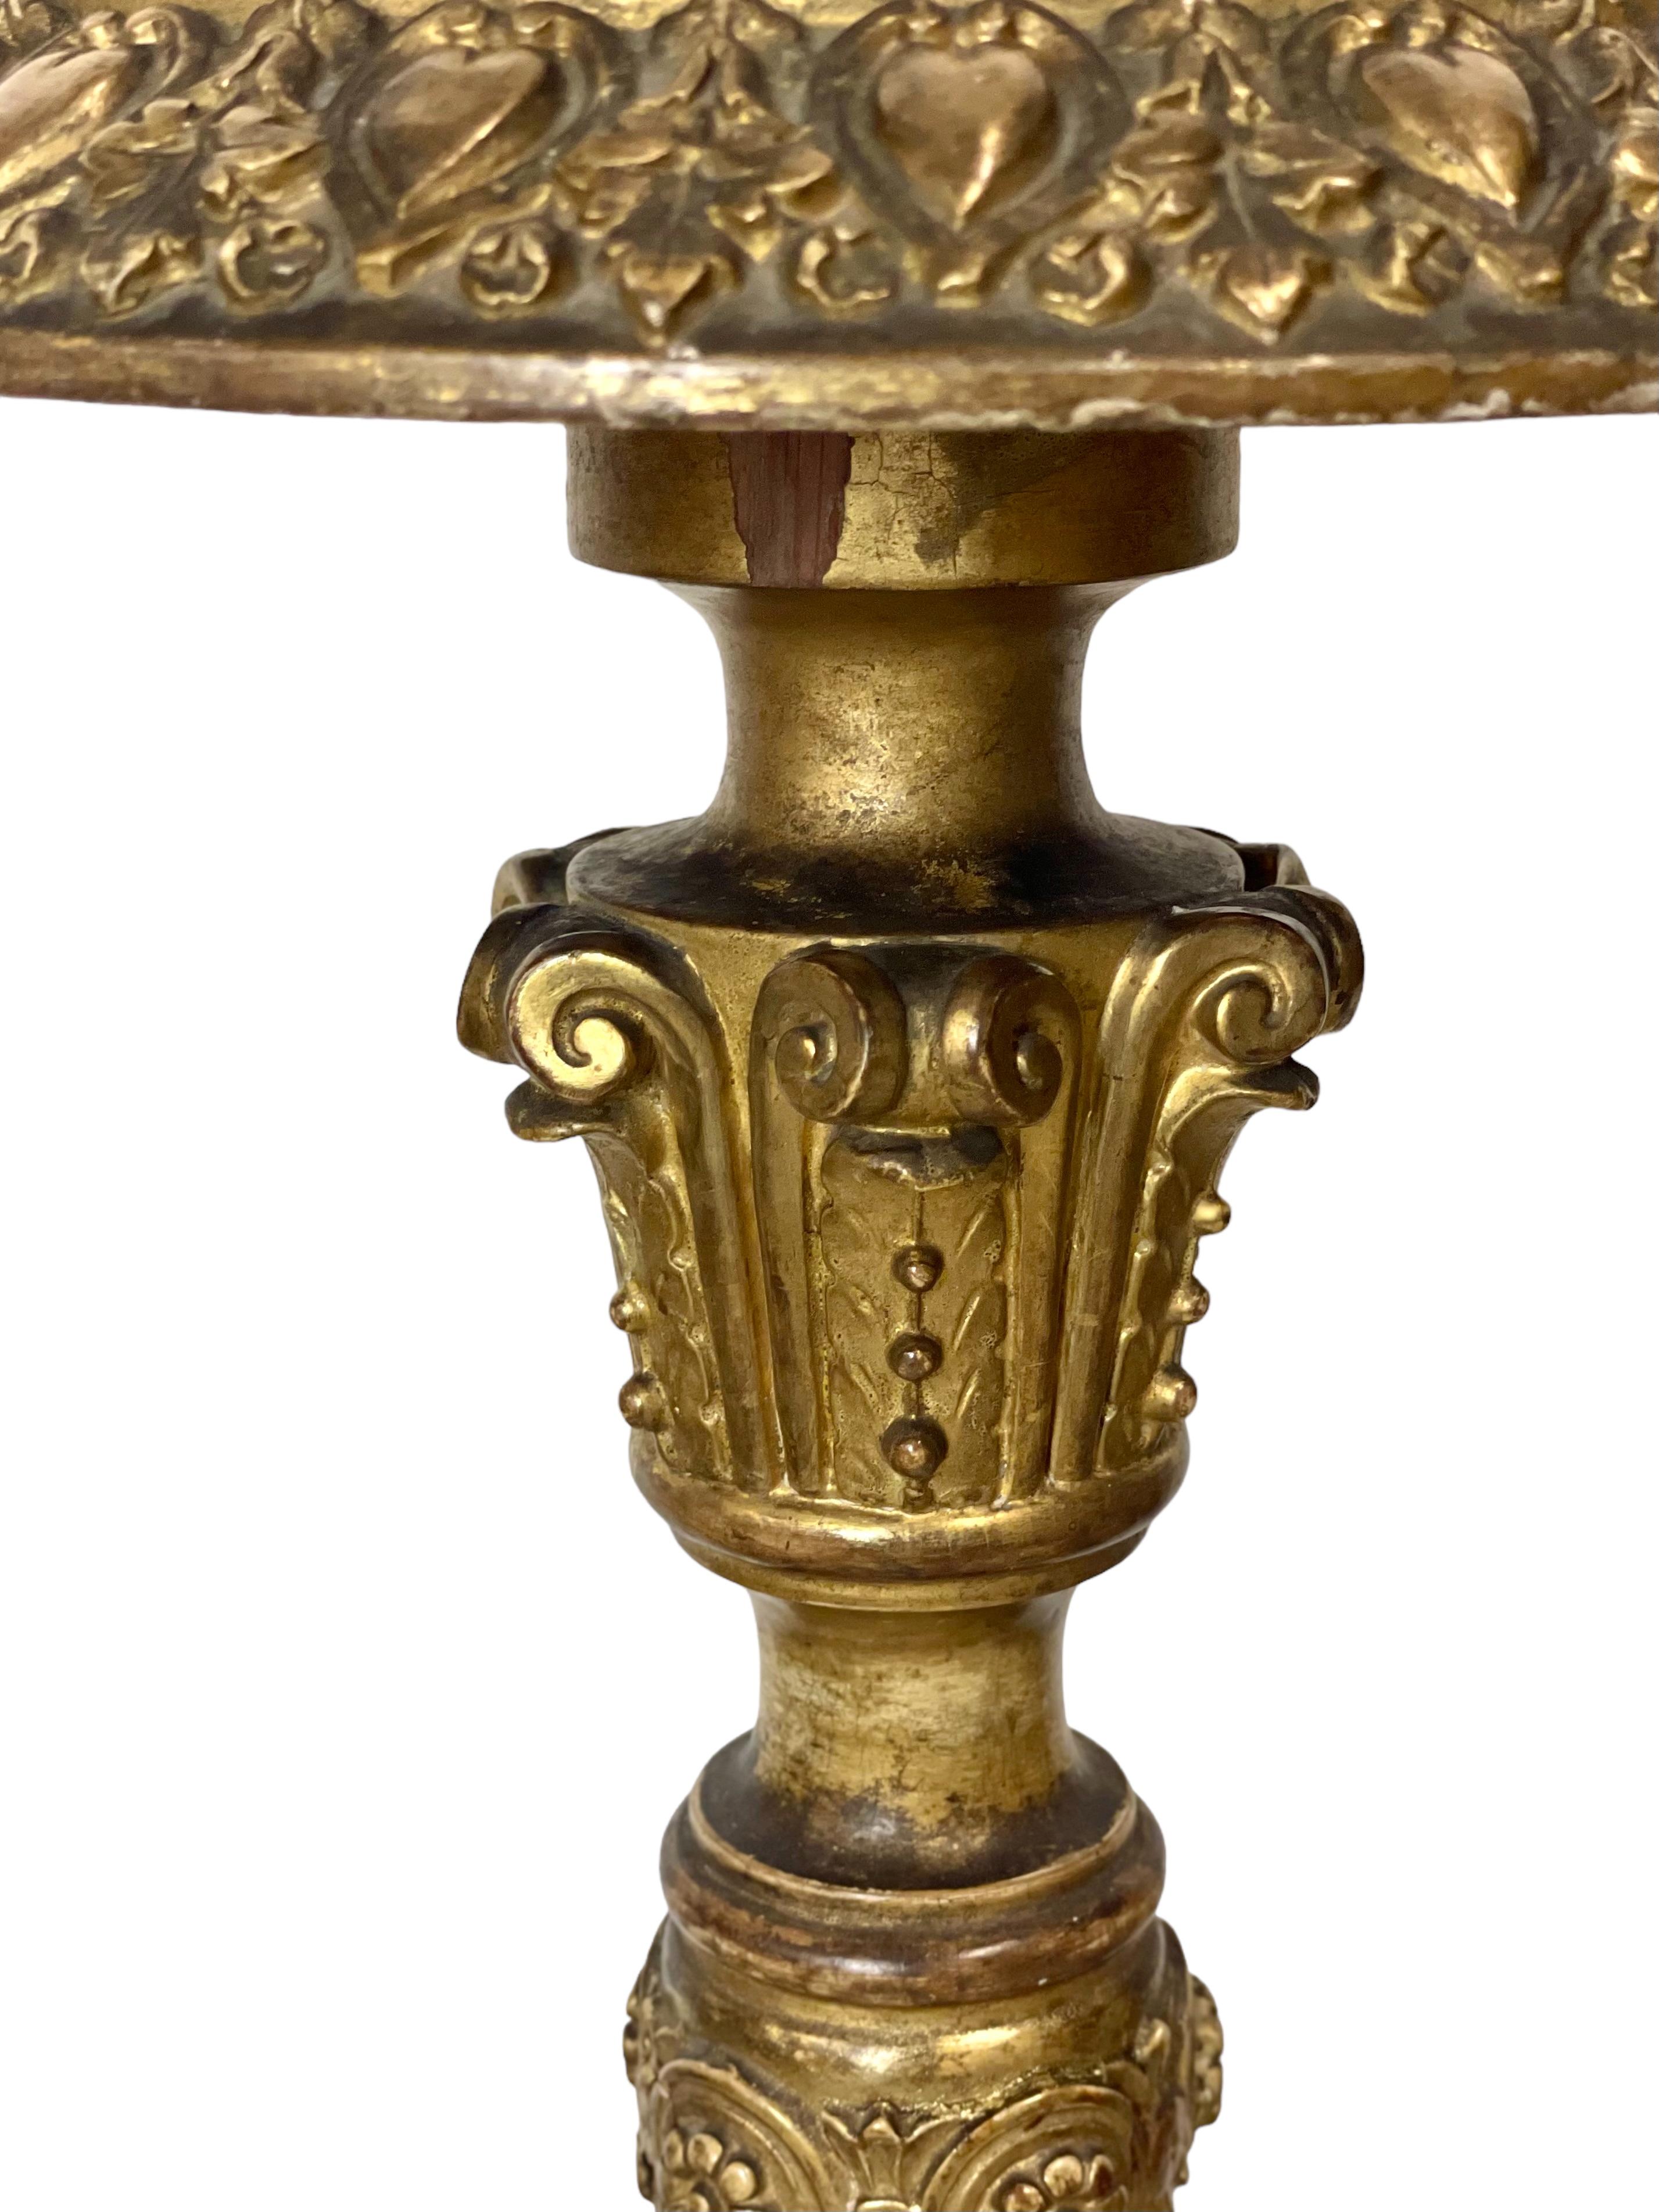 An antique French candle stand (or ‘torchère‘), in elaborately carved, gilded wood. This impressive Napoleon III period column pedestal support three features delicately carved feet encrusted with leaves and flowers, while the top is encircled by